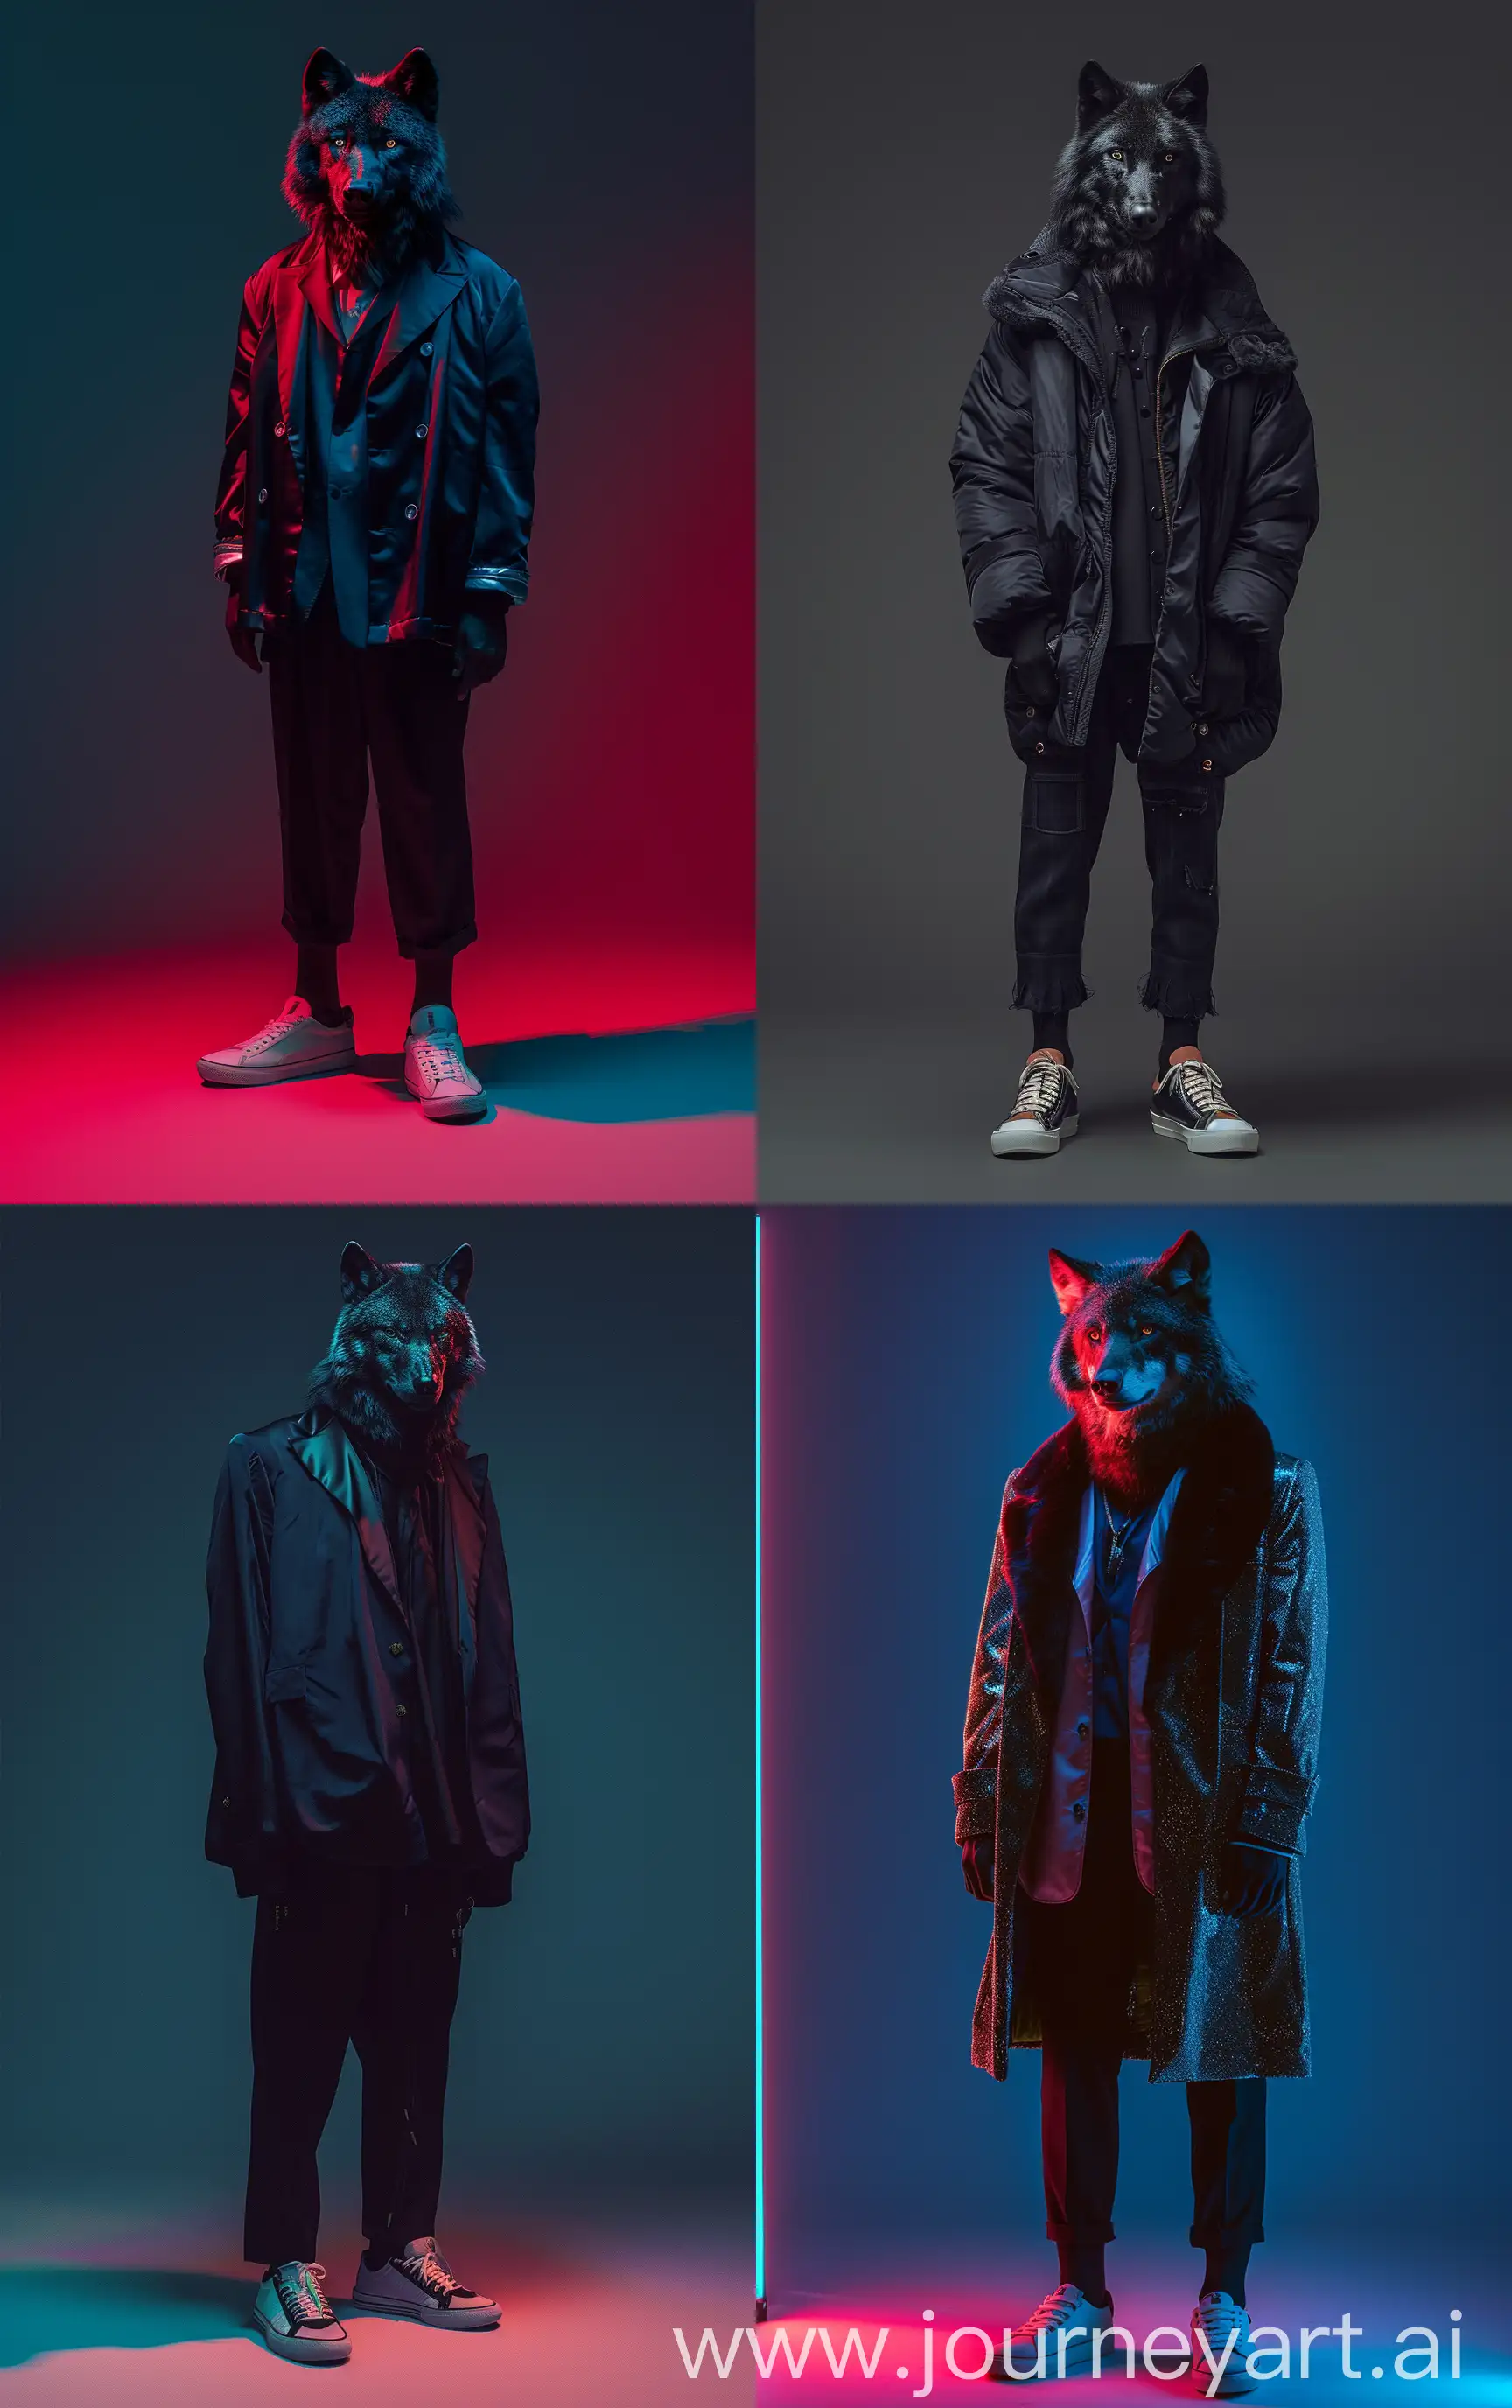 Anthropomorphic-Black-Wolf-Fashion-Photography-with-1980s-Luxury-Attire-and-Sneakers